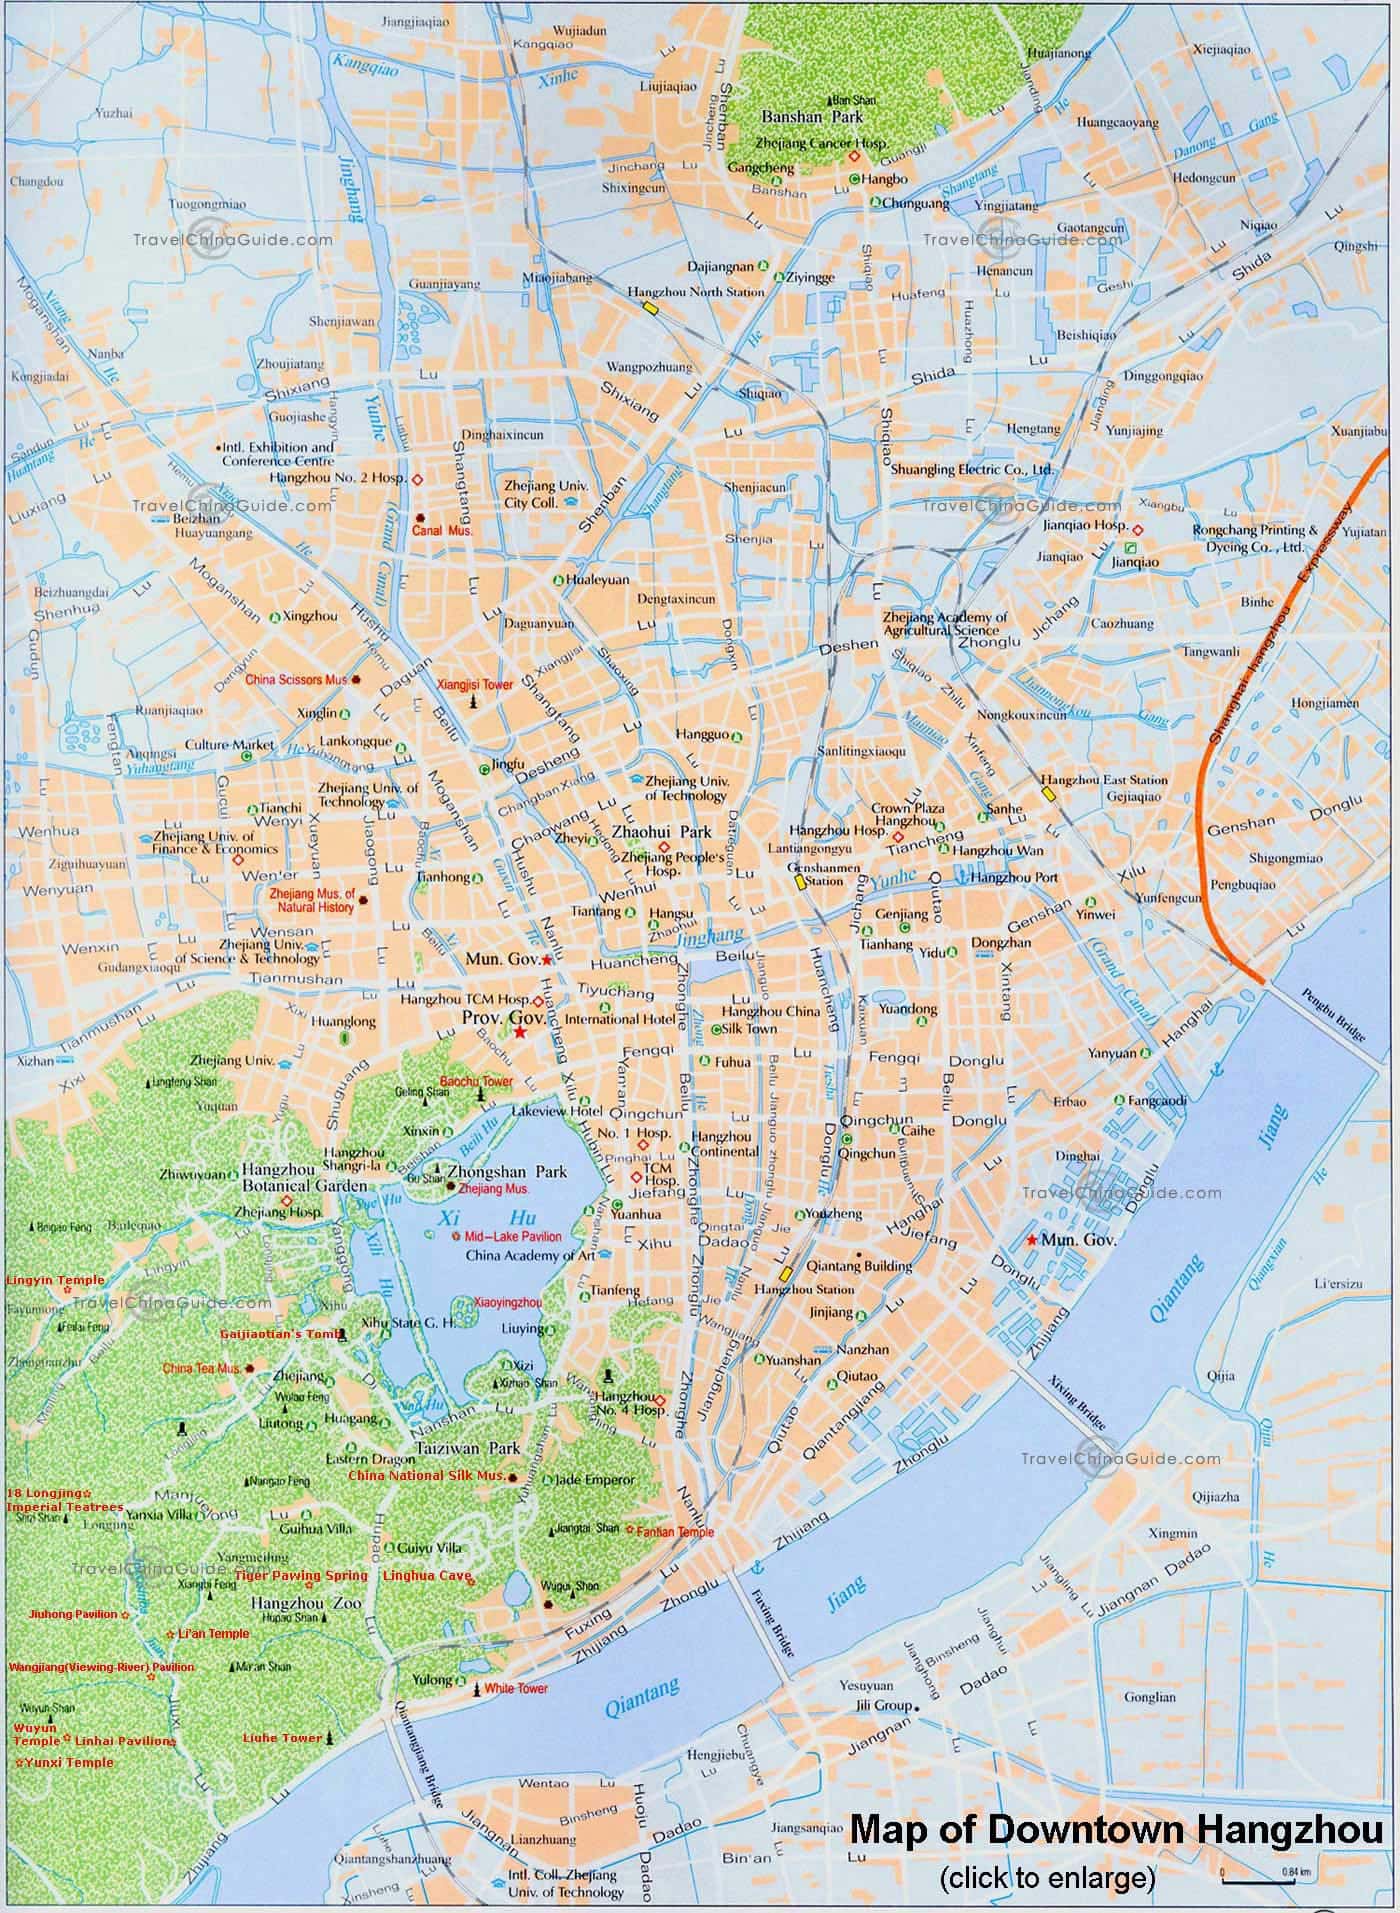 China Hangzhou Maps: Streets, Tourist Attractions